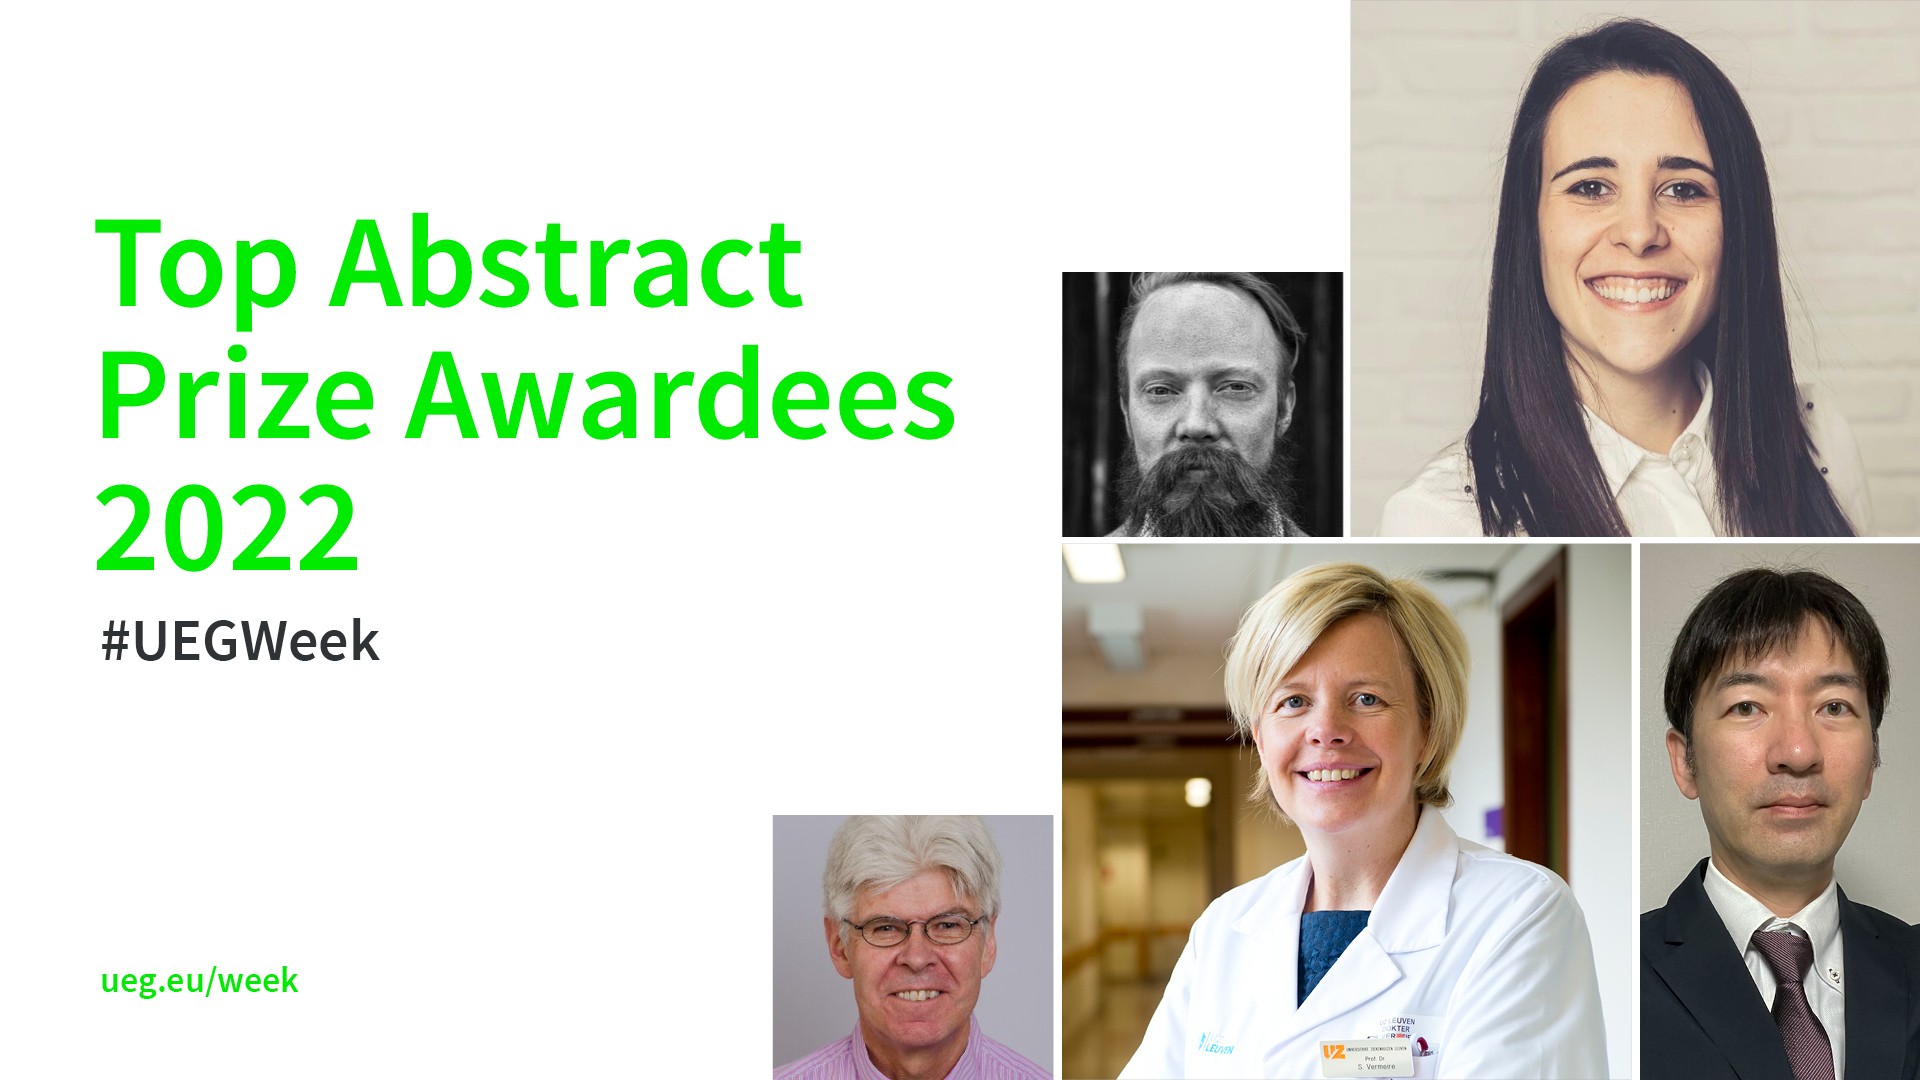 UEG Top Abstract Prize Awardees 2022